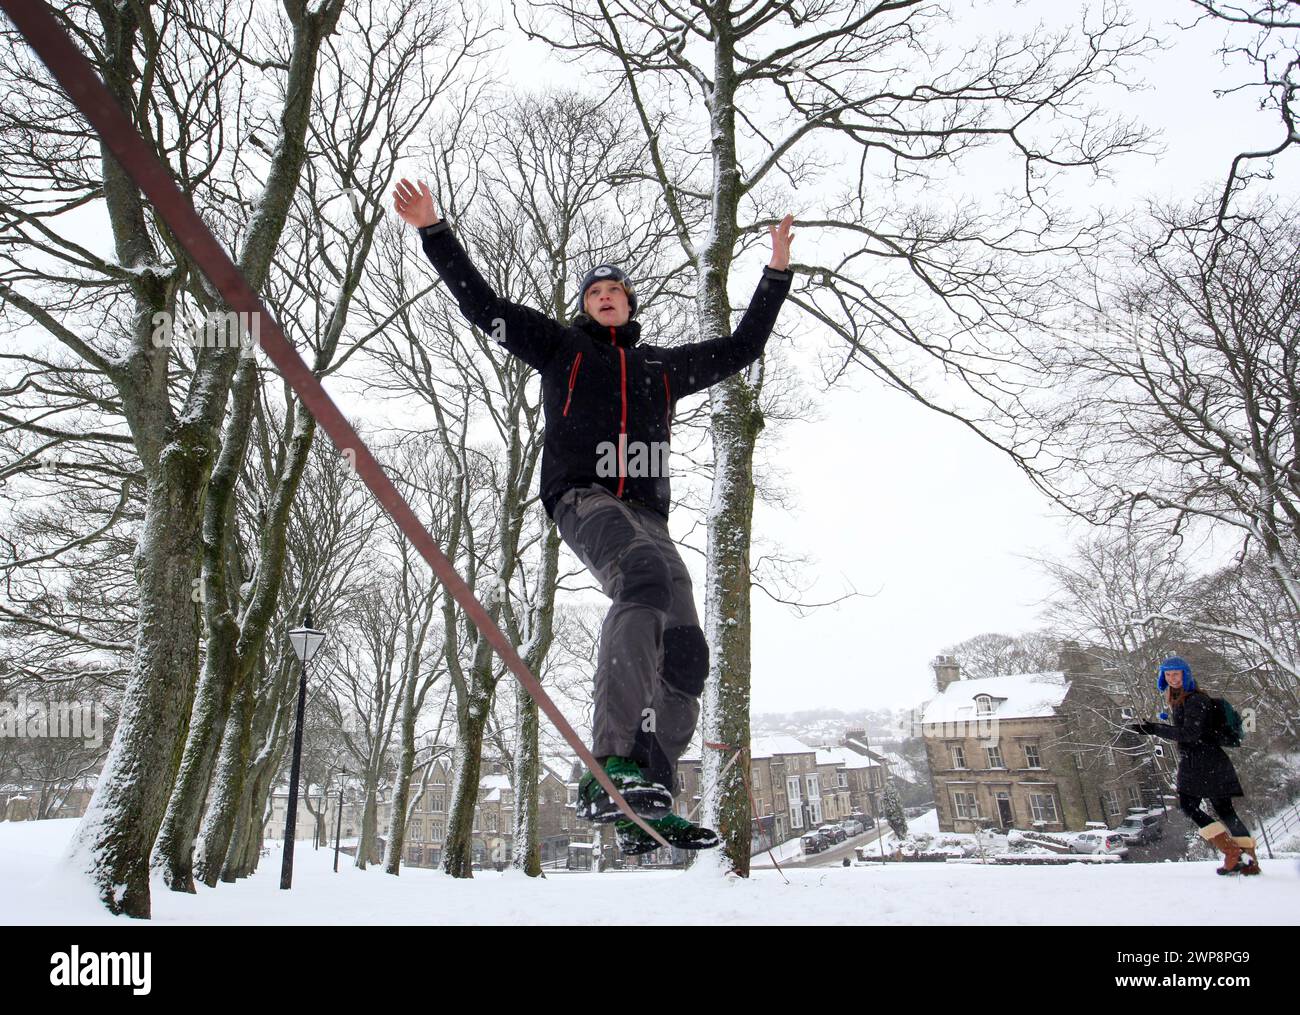 05/02/13   Matt Stevens, 19, practises slacklining across a line strung between trees in Buxton, Derbyshire during heavy snowfall. 'The snow gives a s Stock Photo